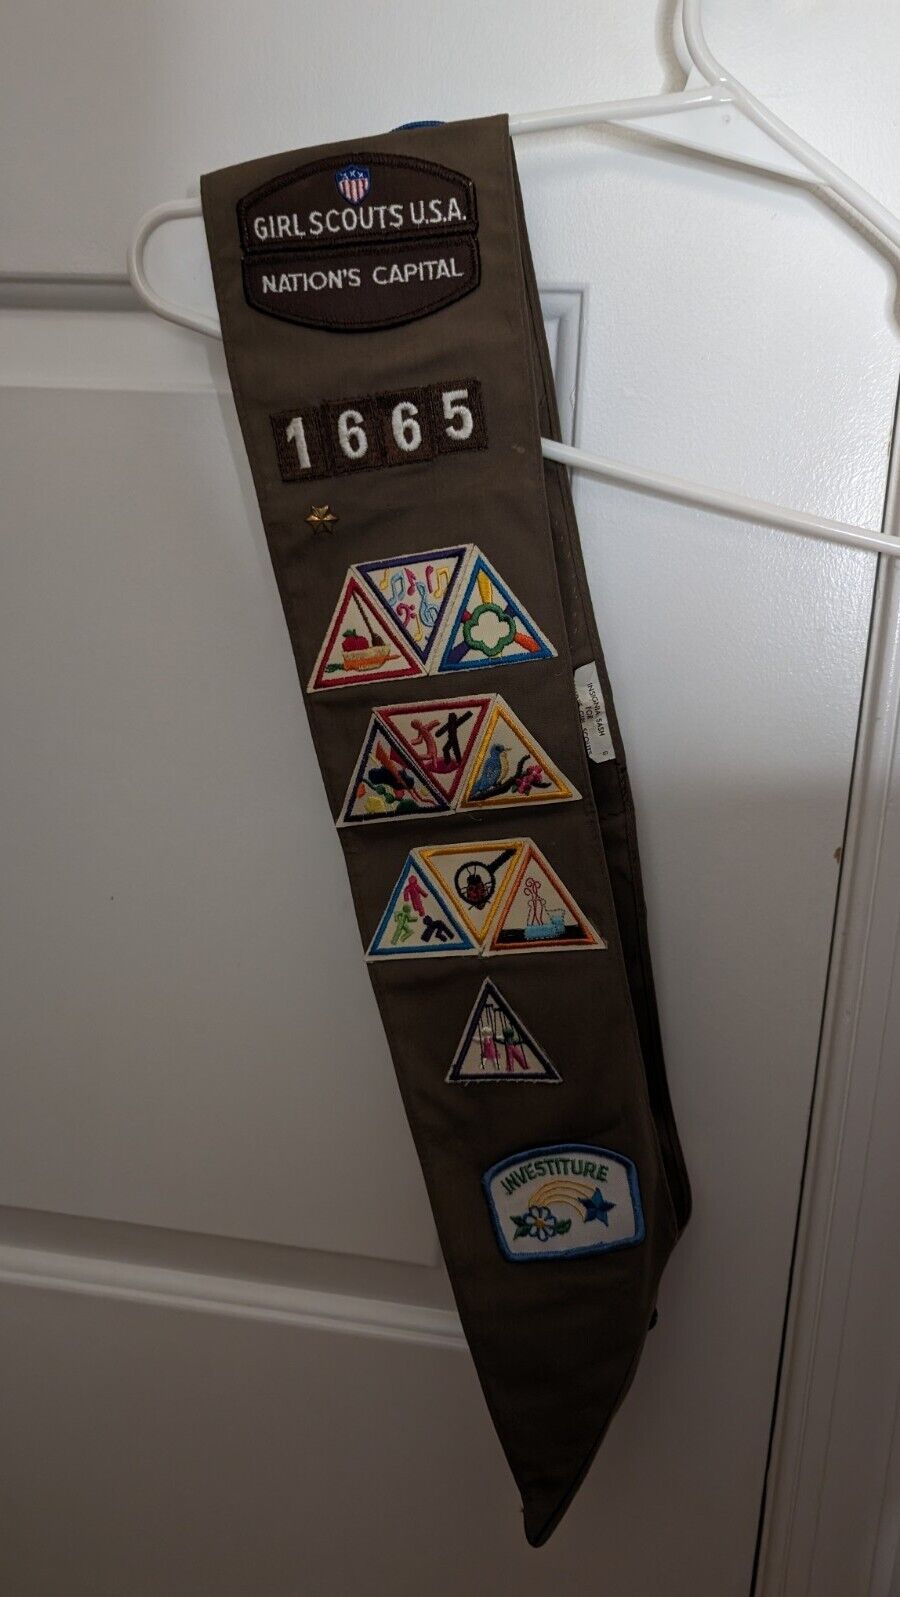 VTG 80s Girl Scouts Brownie Insignia Sash Nation's Capital Wash DC Council 1665